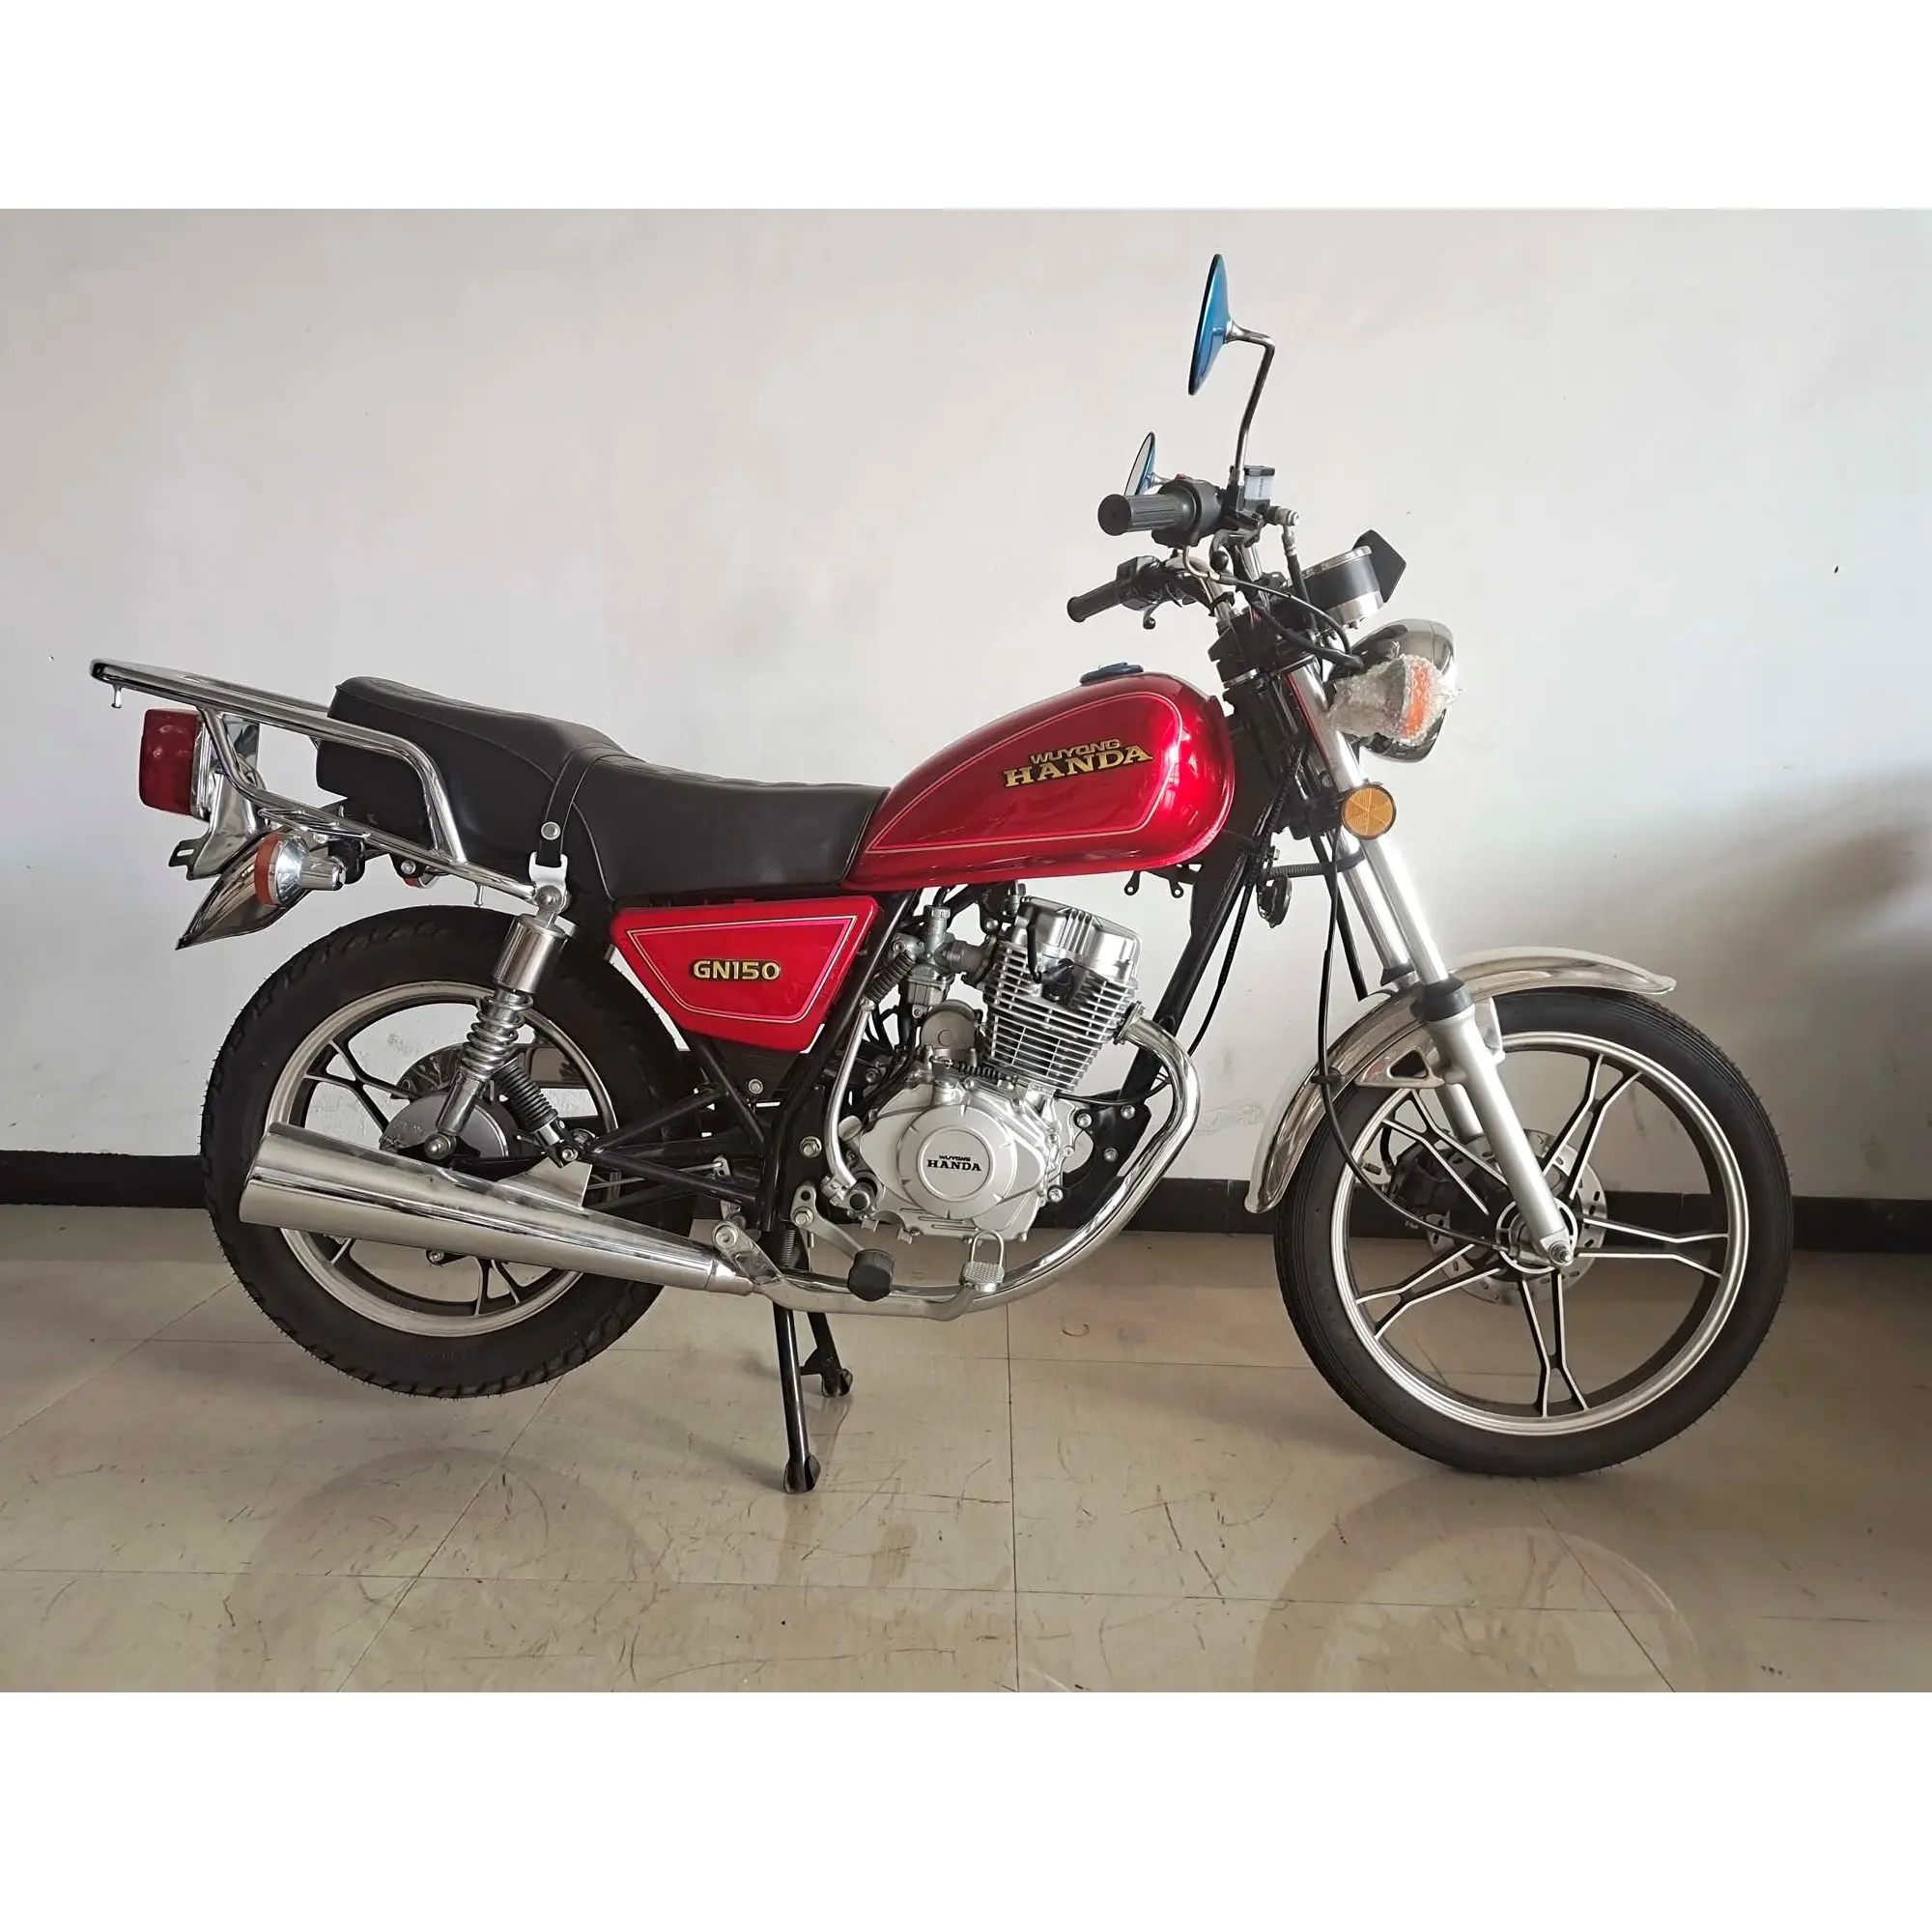 CQHZJ Utility Motorcycle 125cc 150cc GN125 Custom Fuel Efficient Powerful Peace Of Mind Strong Cargo Capacity Seat Many People